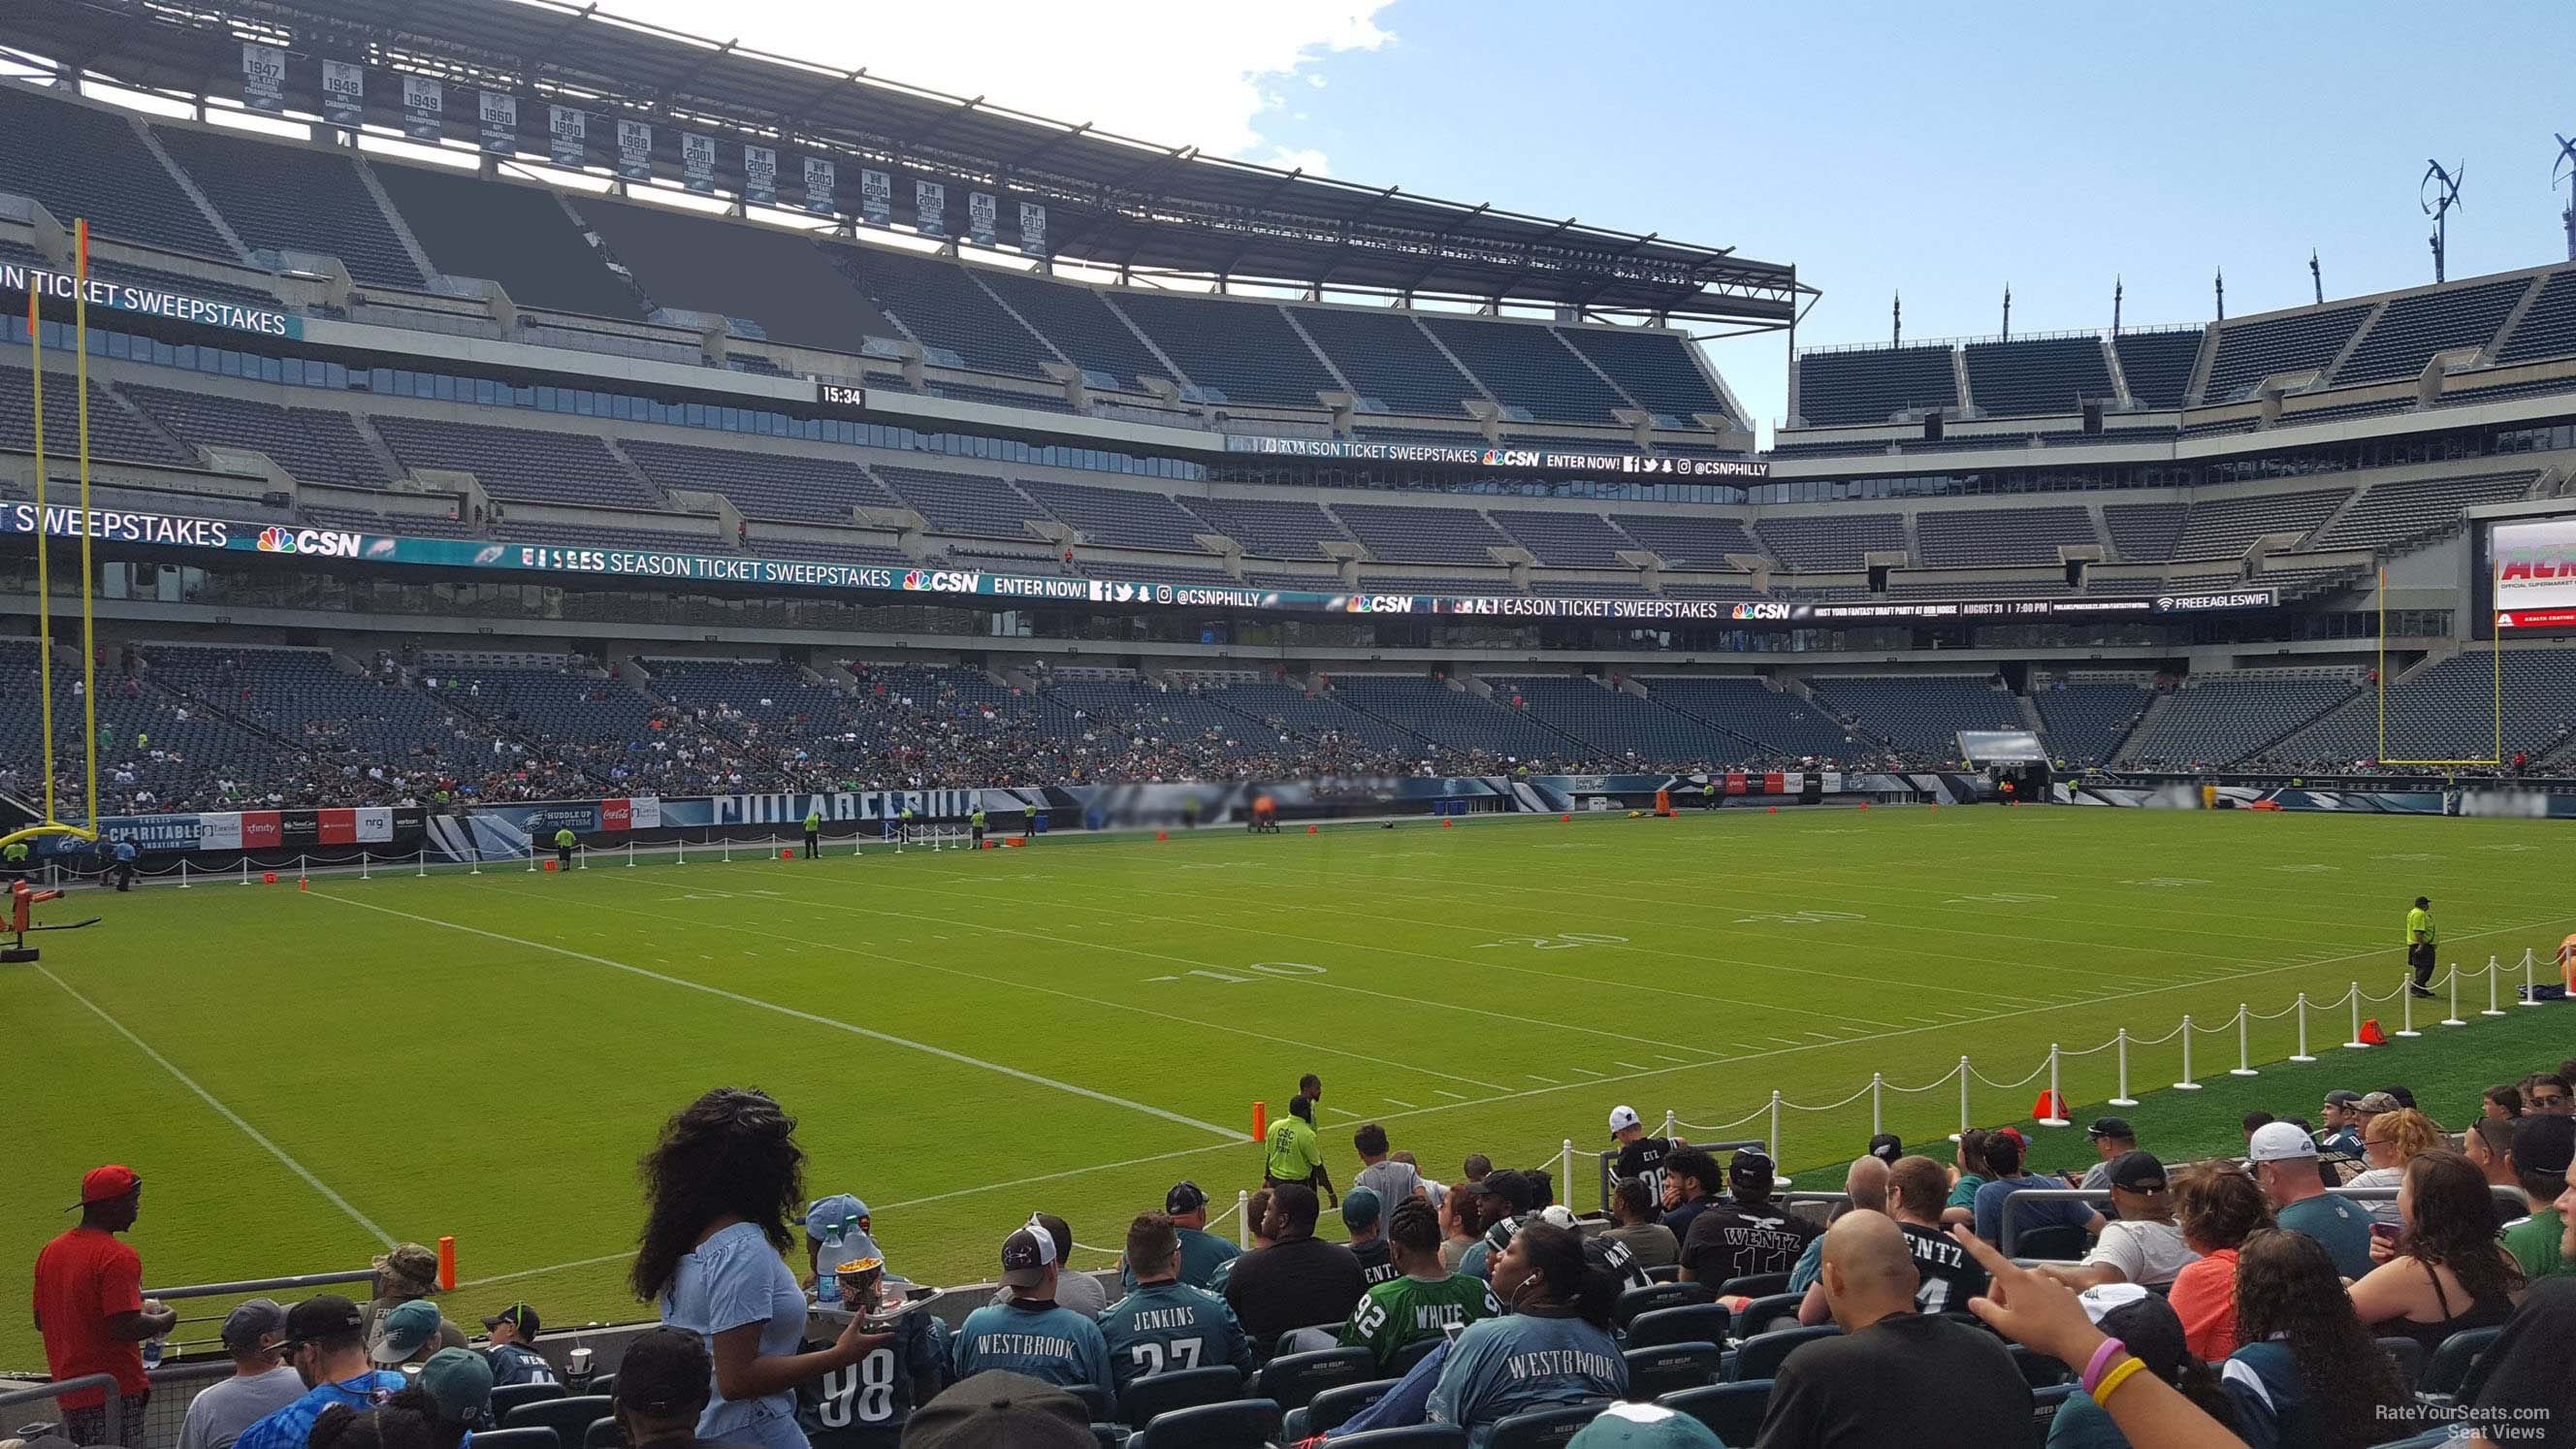 section 134, row 12 seat view  for football - lincoln financial field